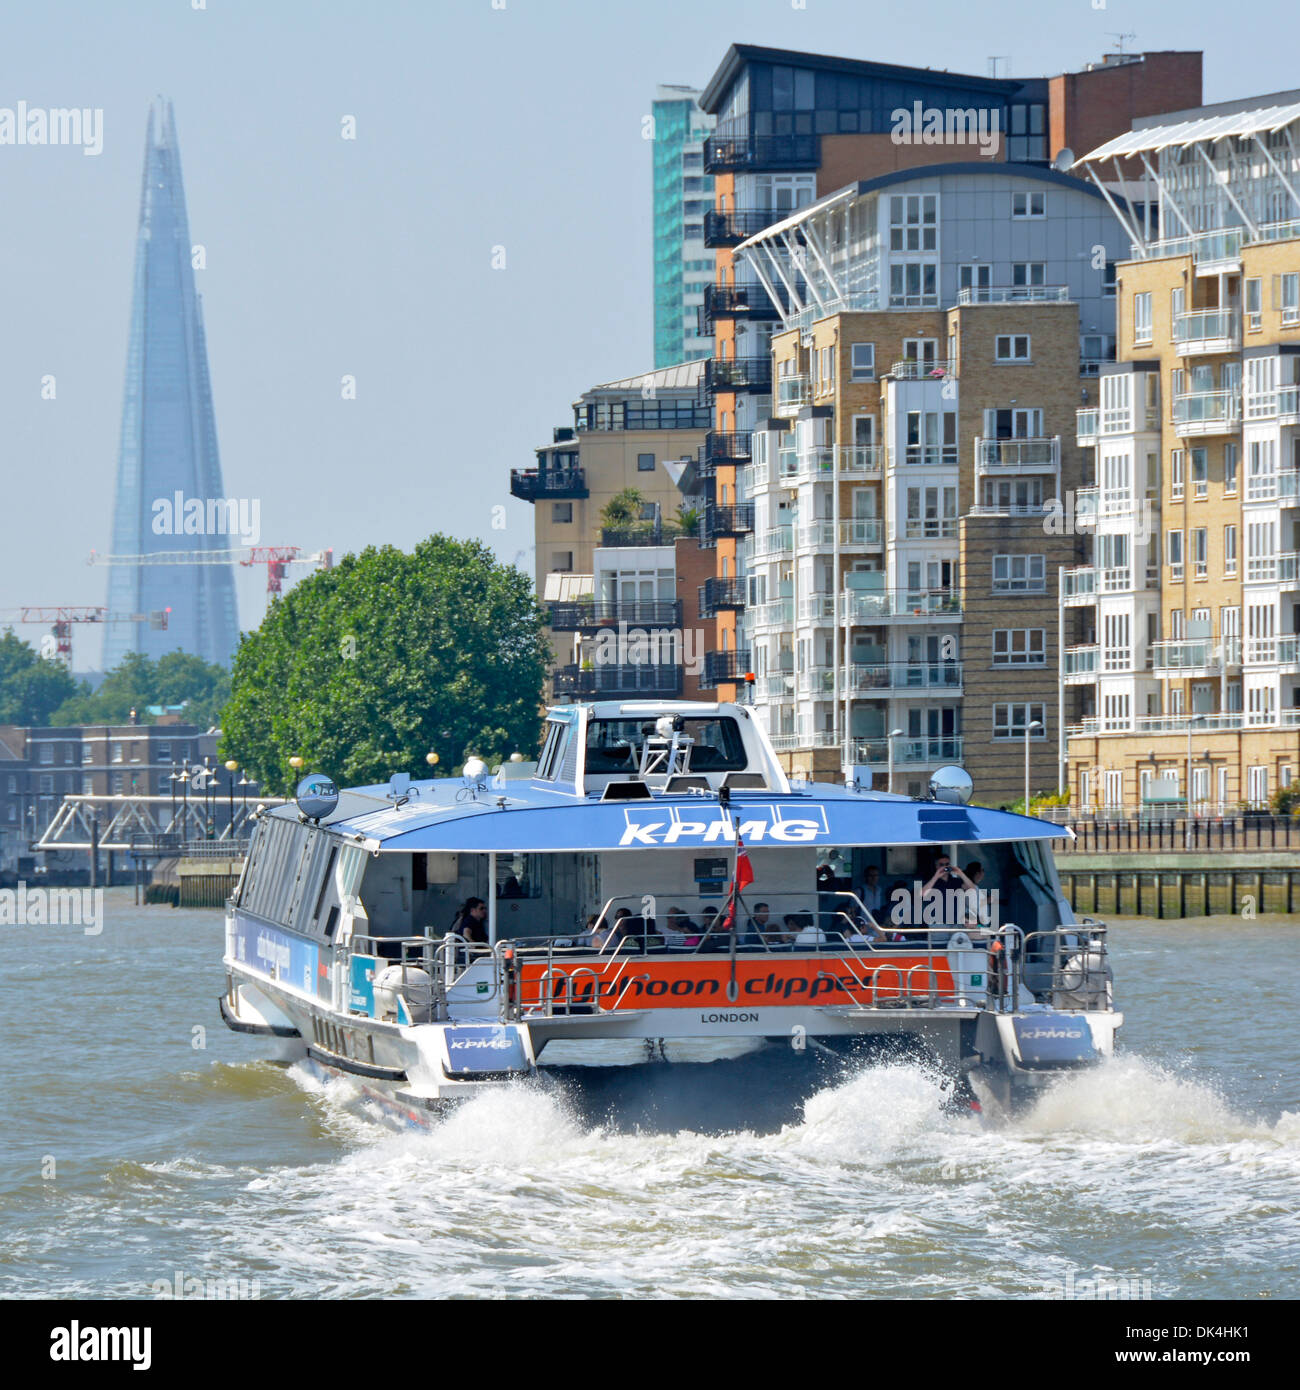 Stern view of catamaran design of Thames clipper river water-bus service with London Shard building beyond Stock Photo